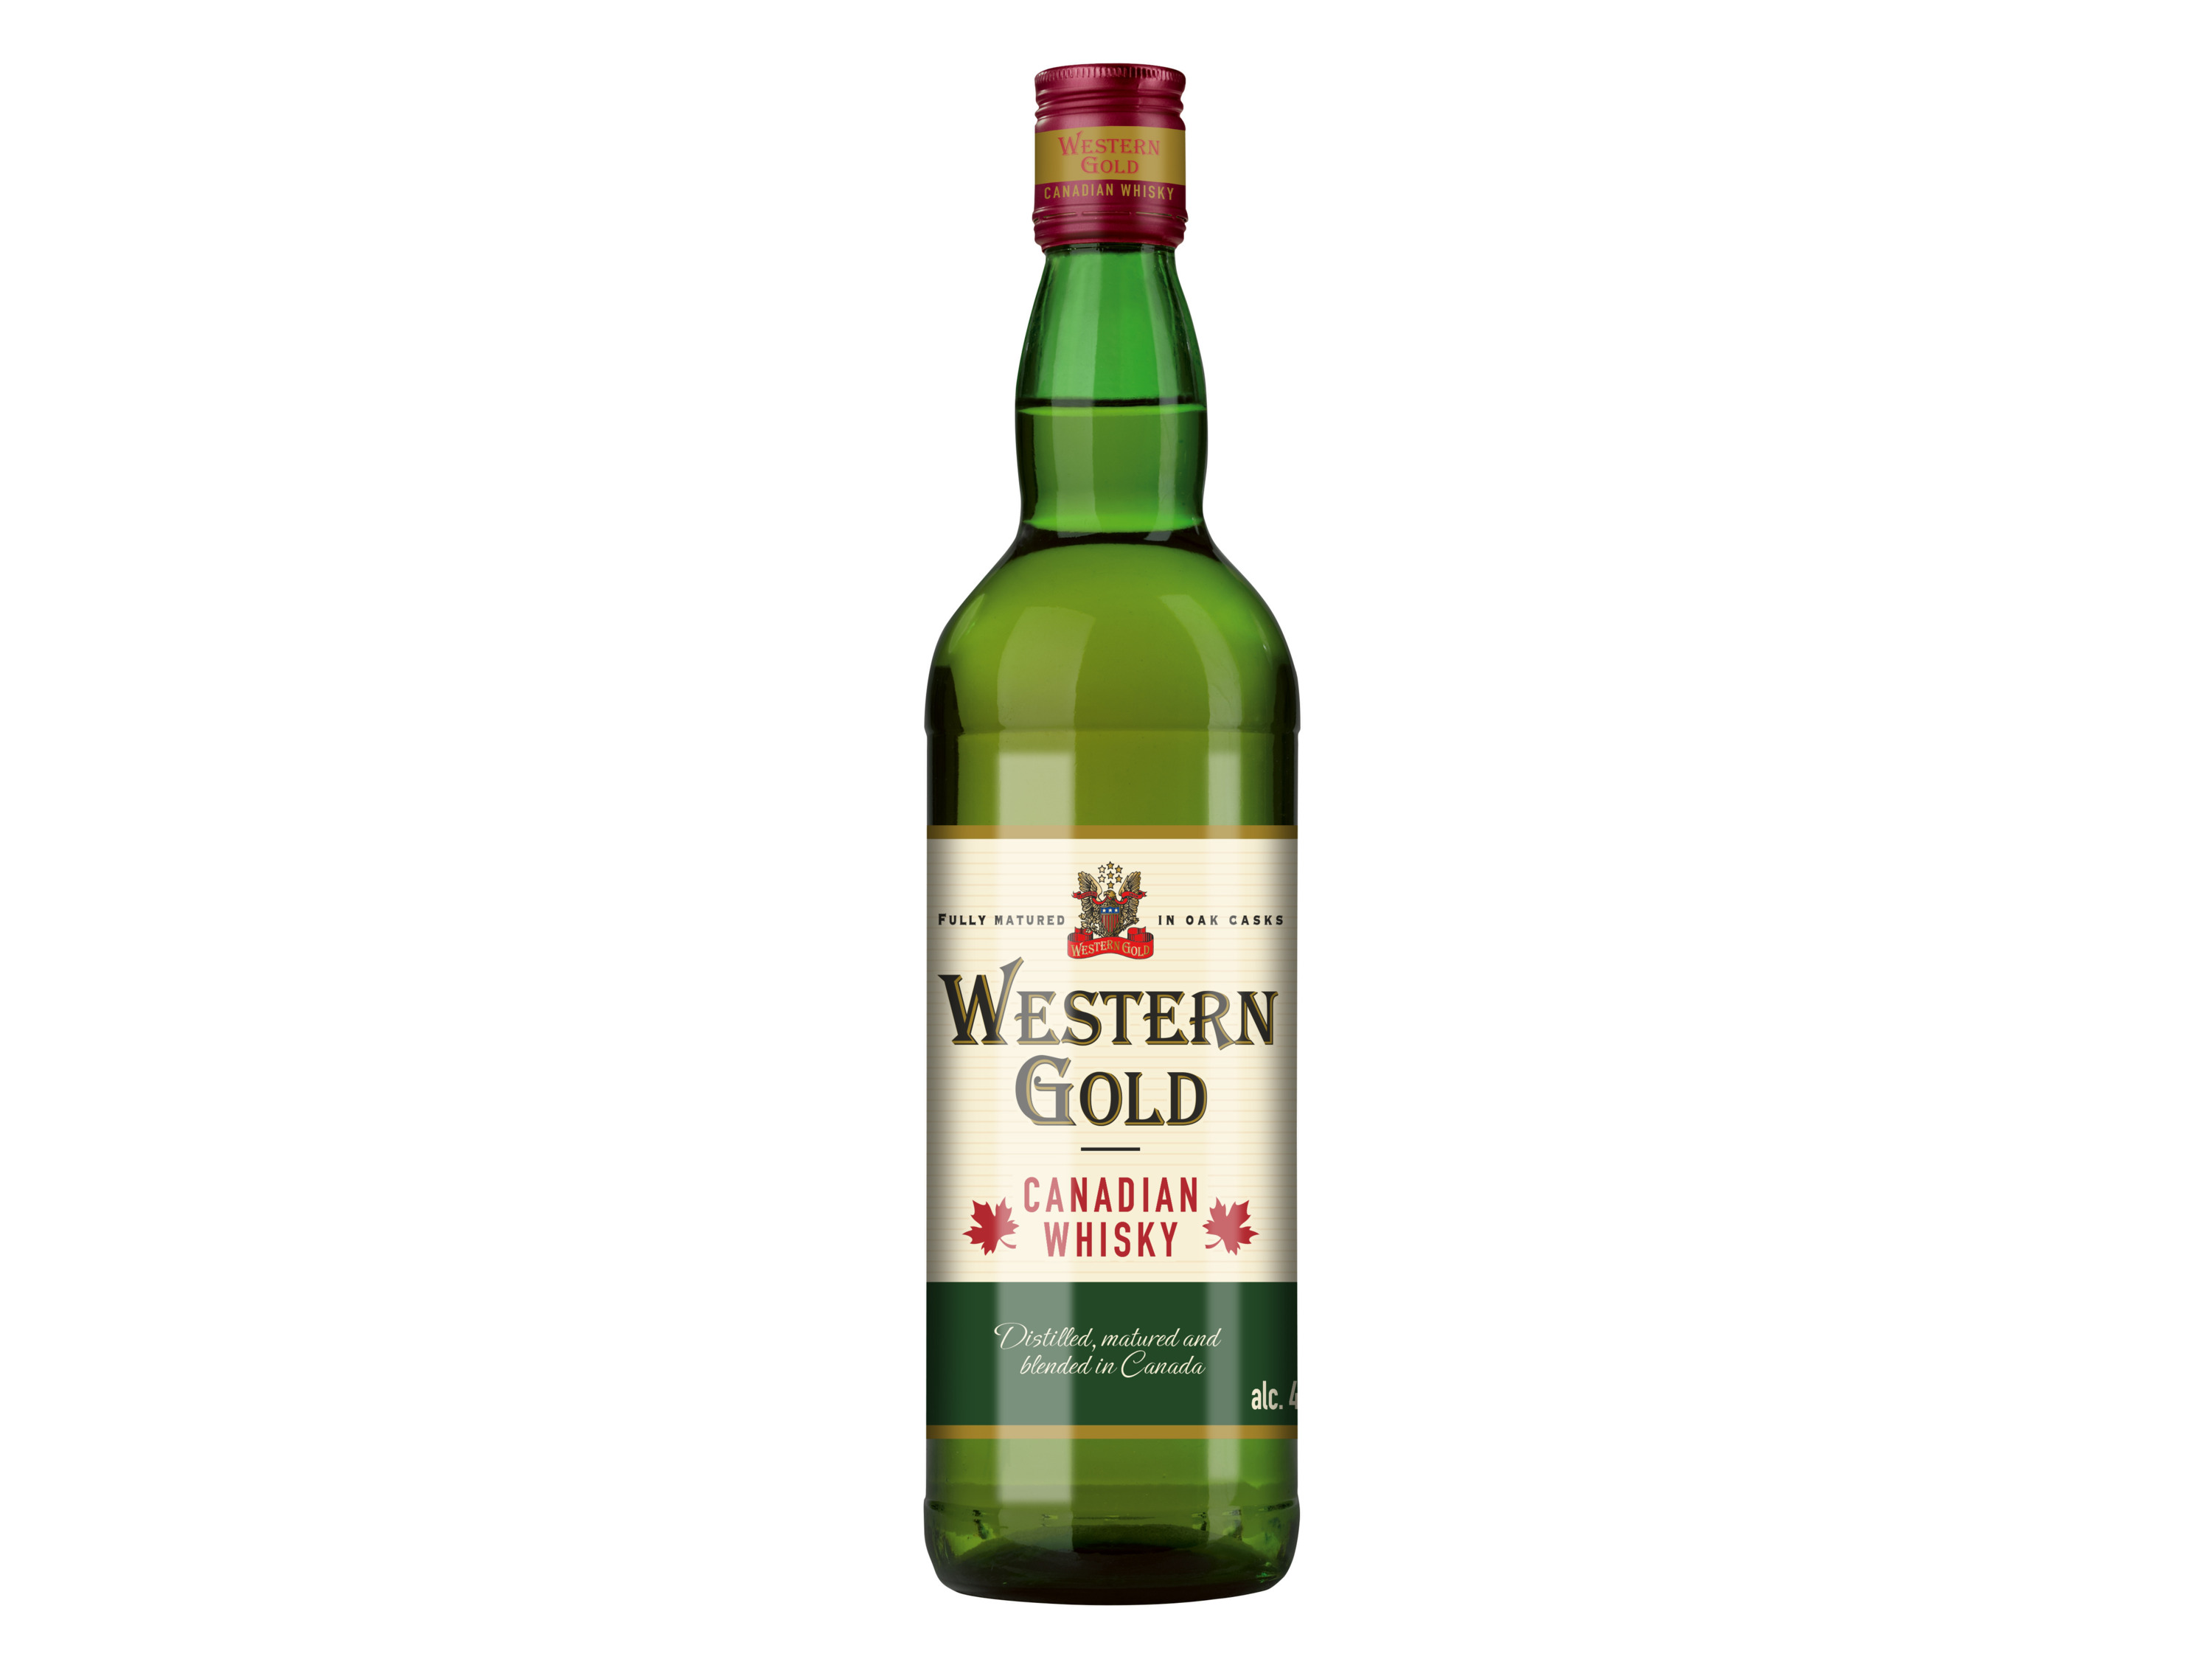 WESTERN GOLD Canadian Whisky 40% Vol